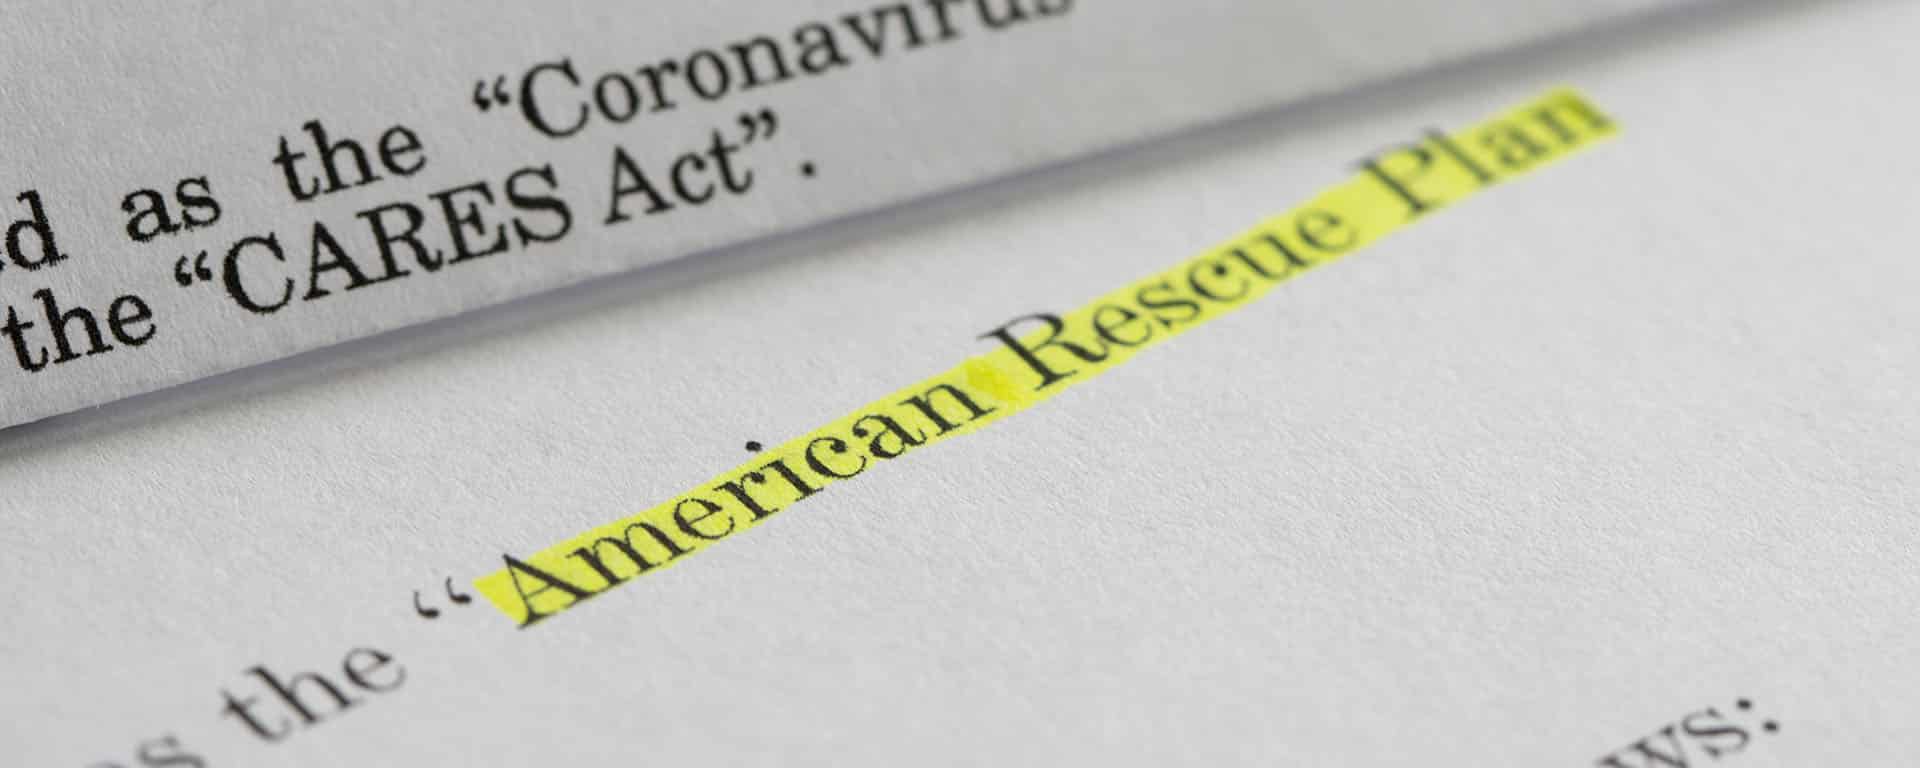 American Rescue Plan Act of 2021 and CARES Act